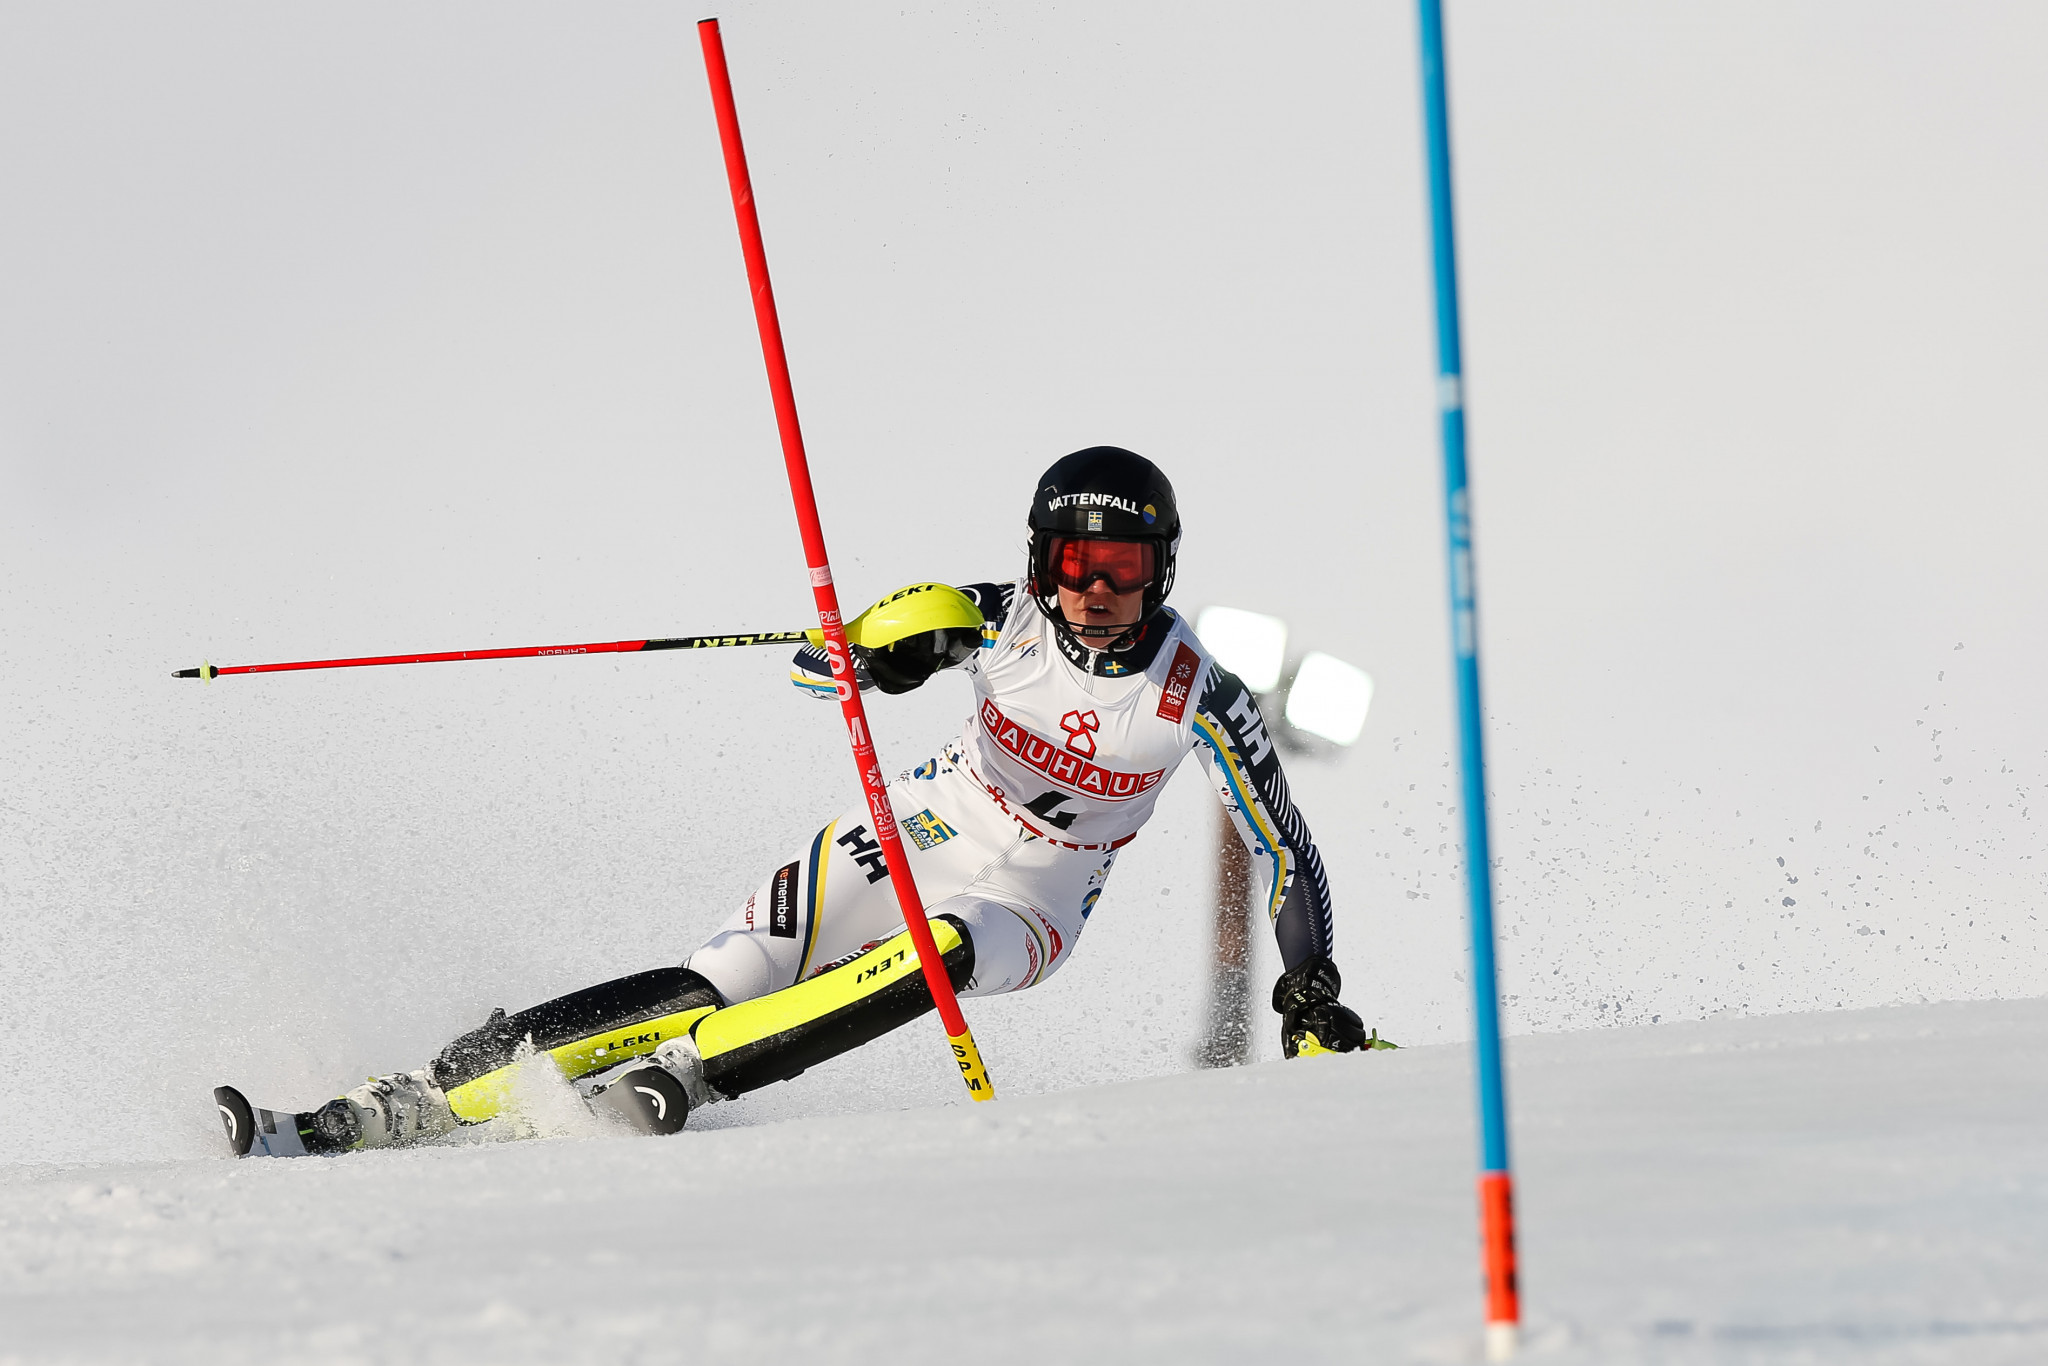 Anna Swenn Larsson dropped down to second place ©Getty Images